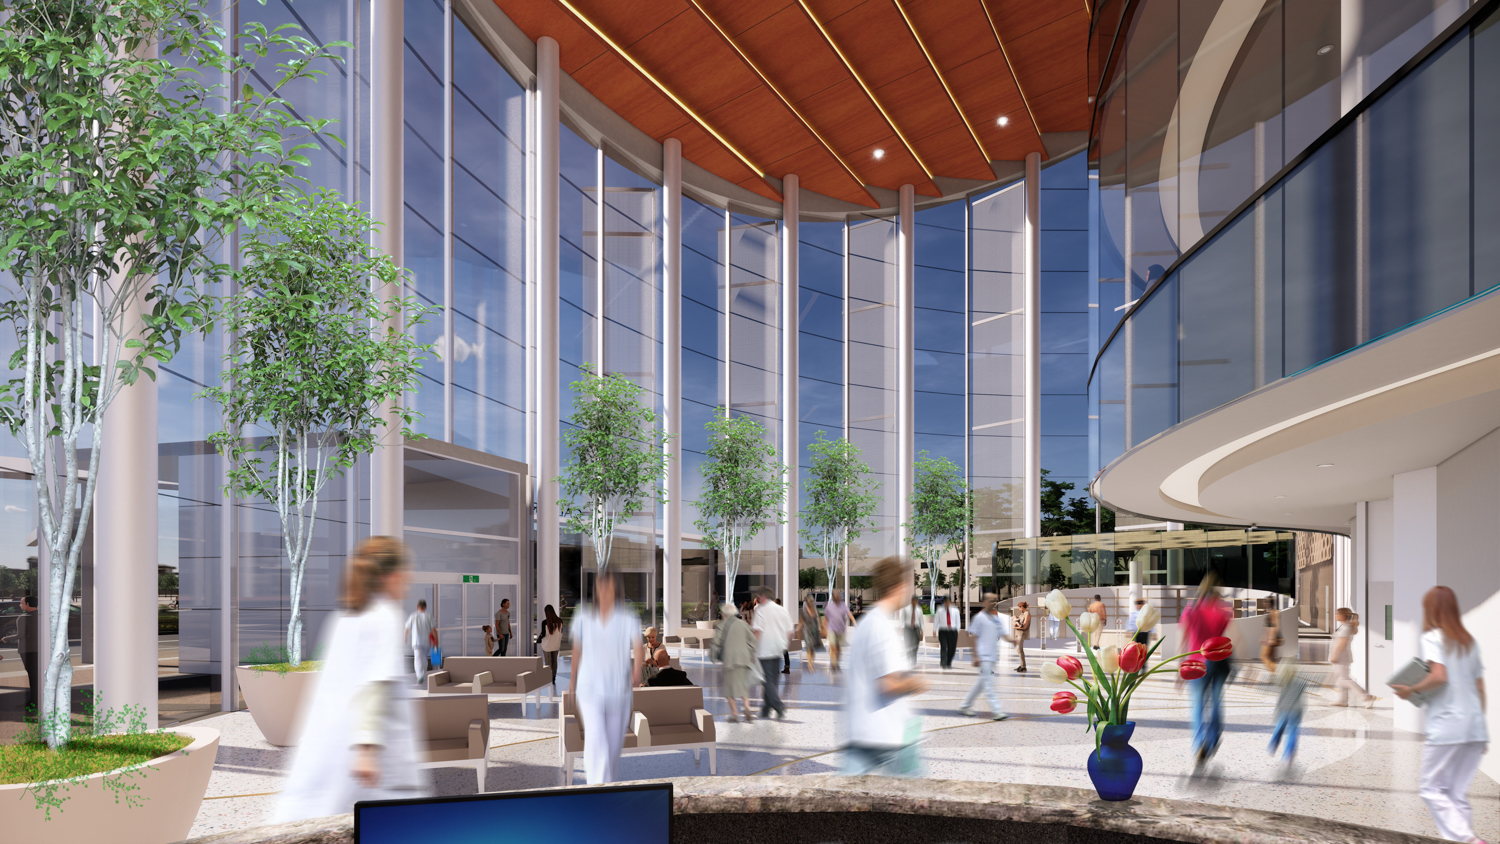 Rendered activity within the lobby of the California Northstate University proposed Natomas hospital, design by Fong & Chan Architects